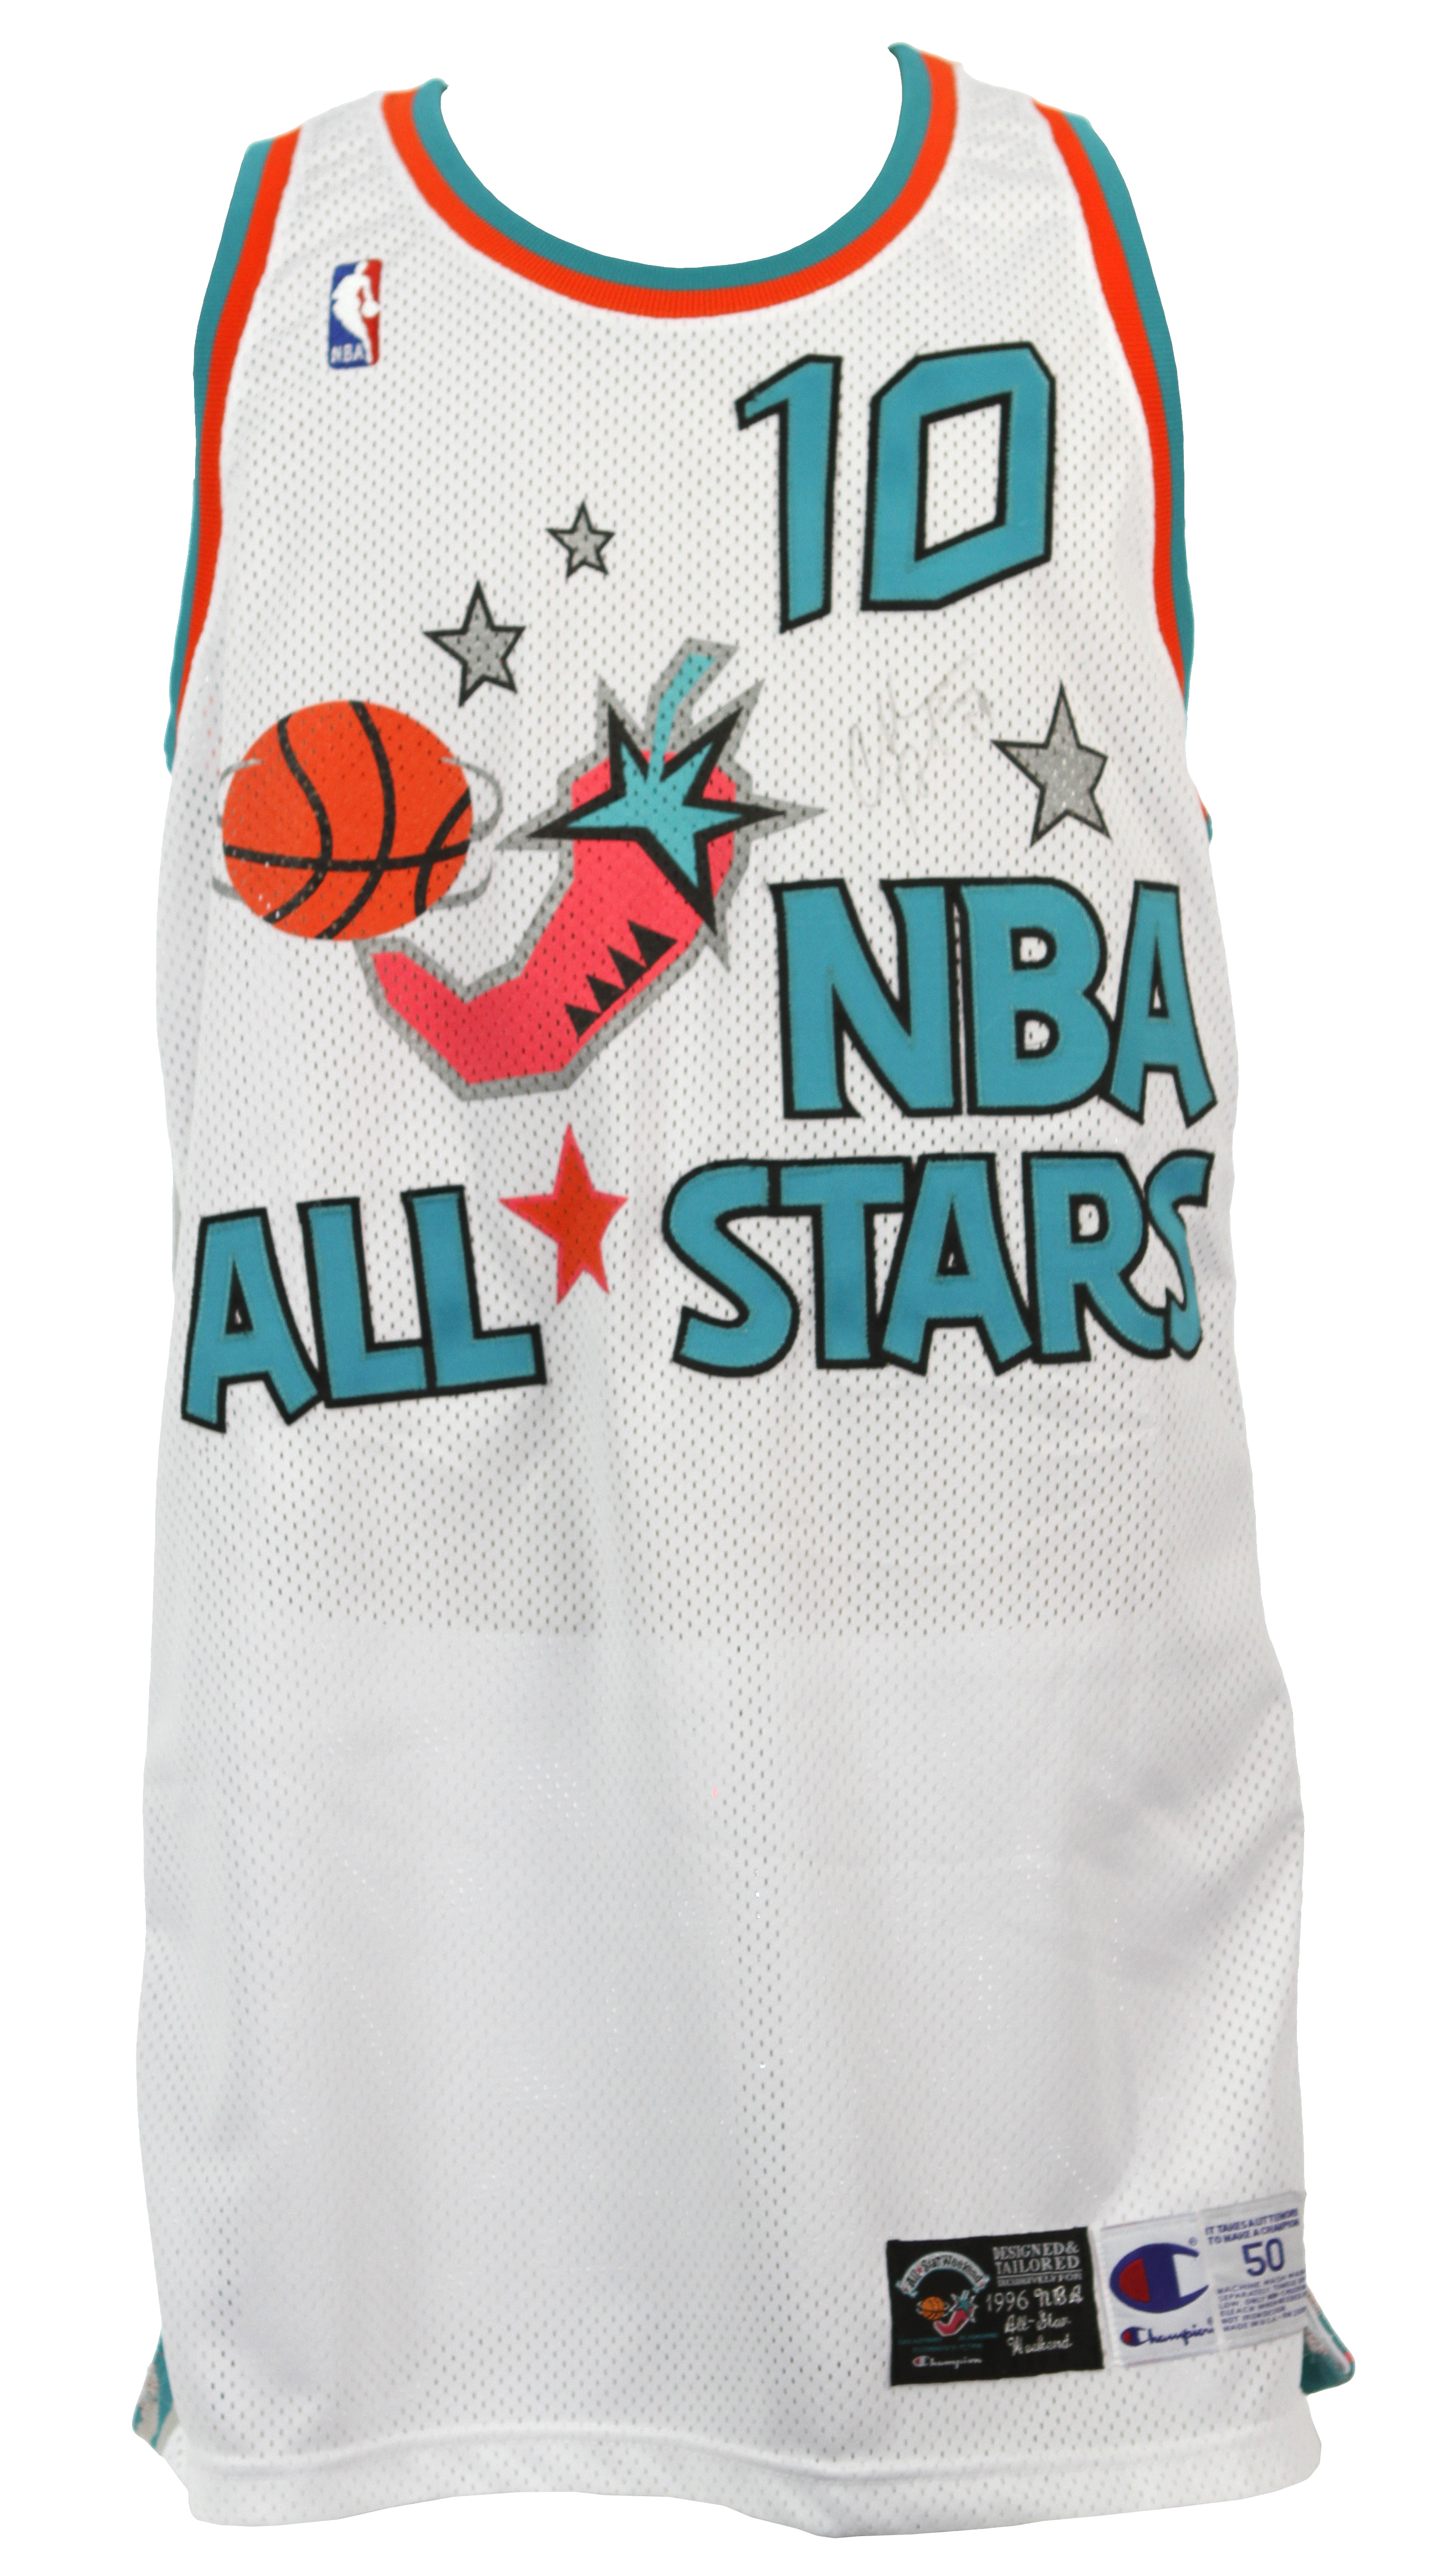 1996 nba all star game jersey